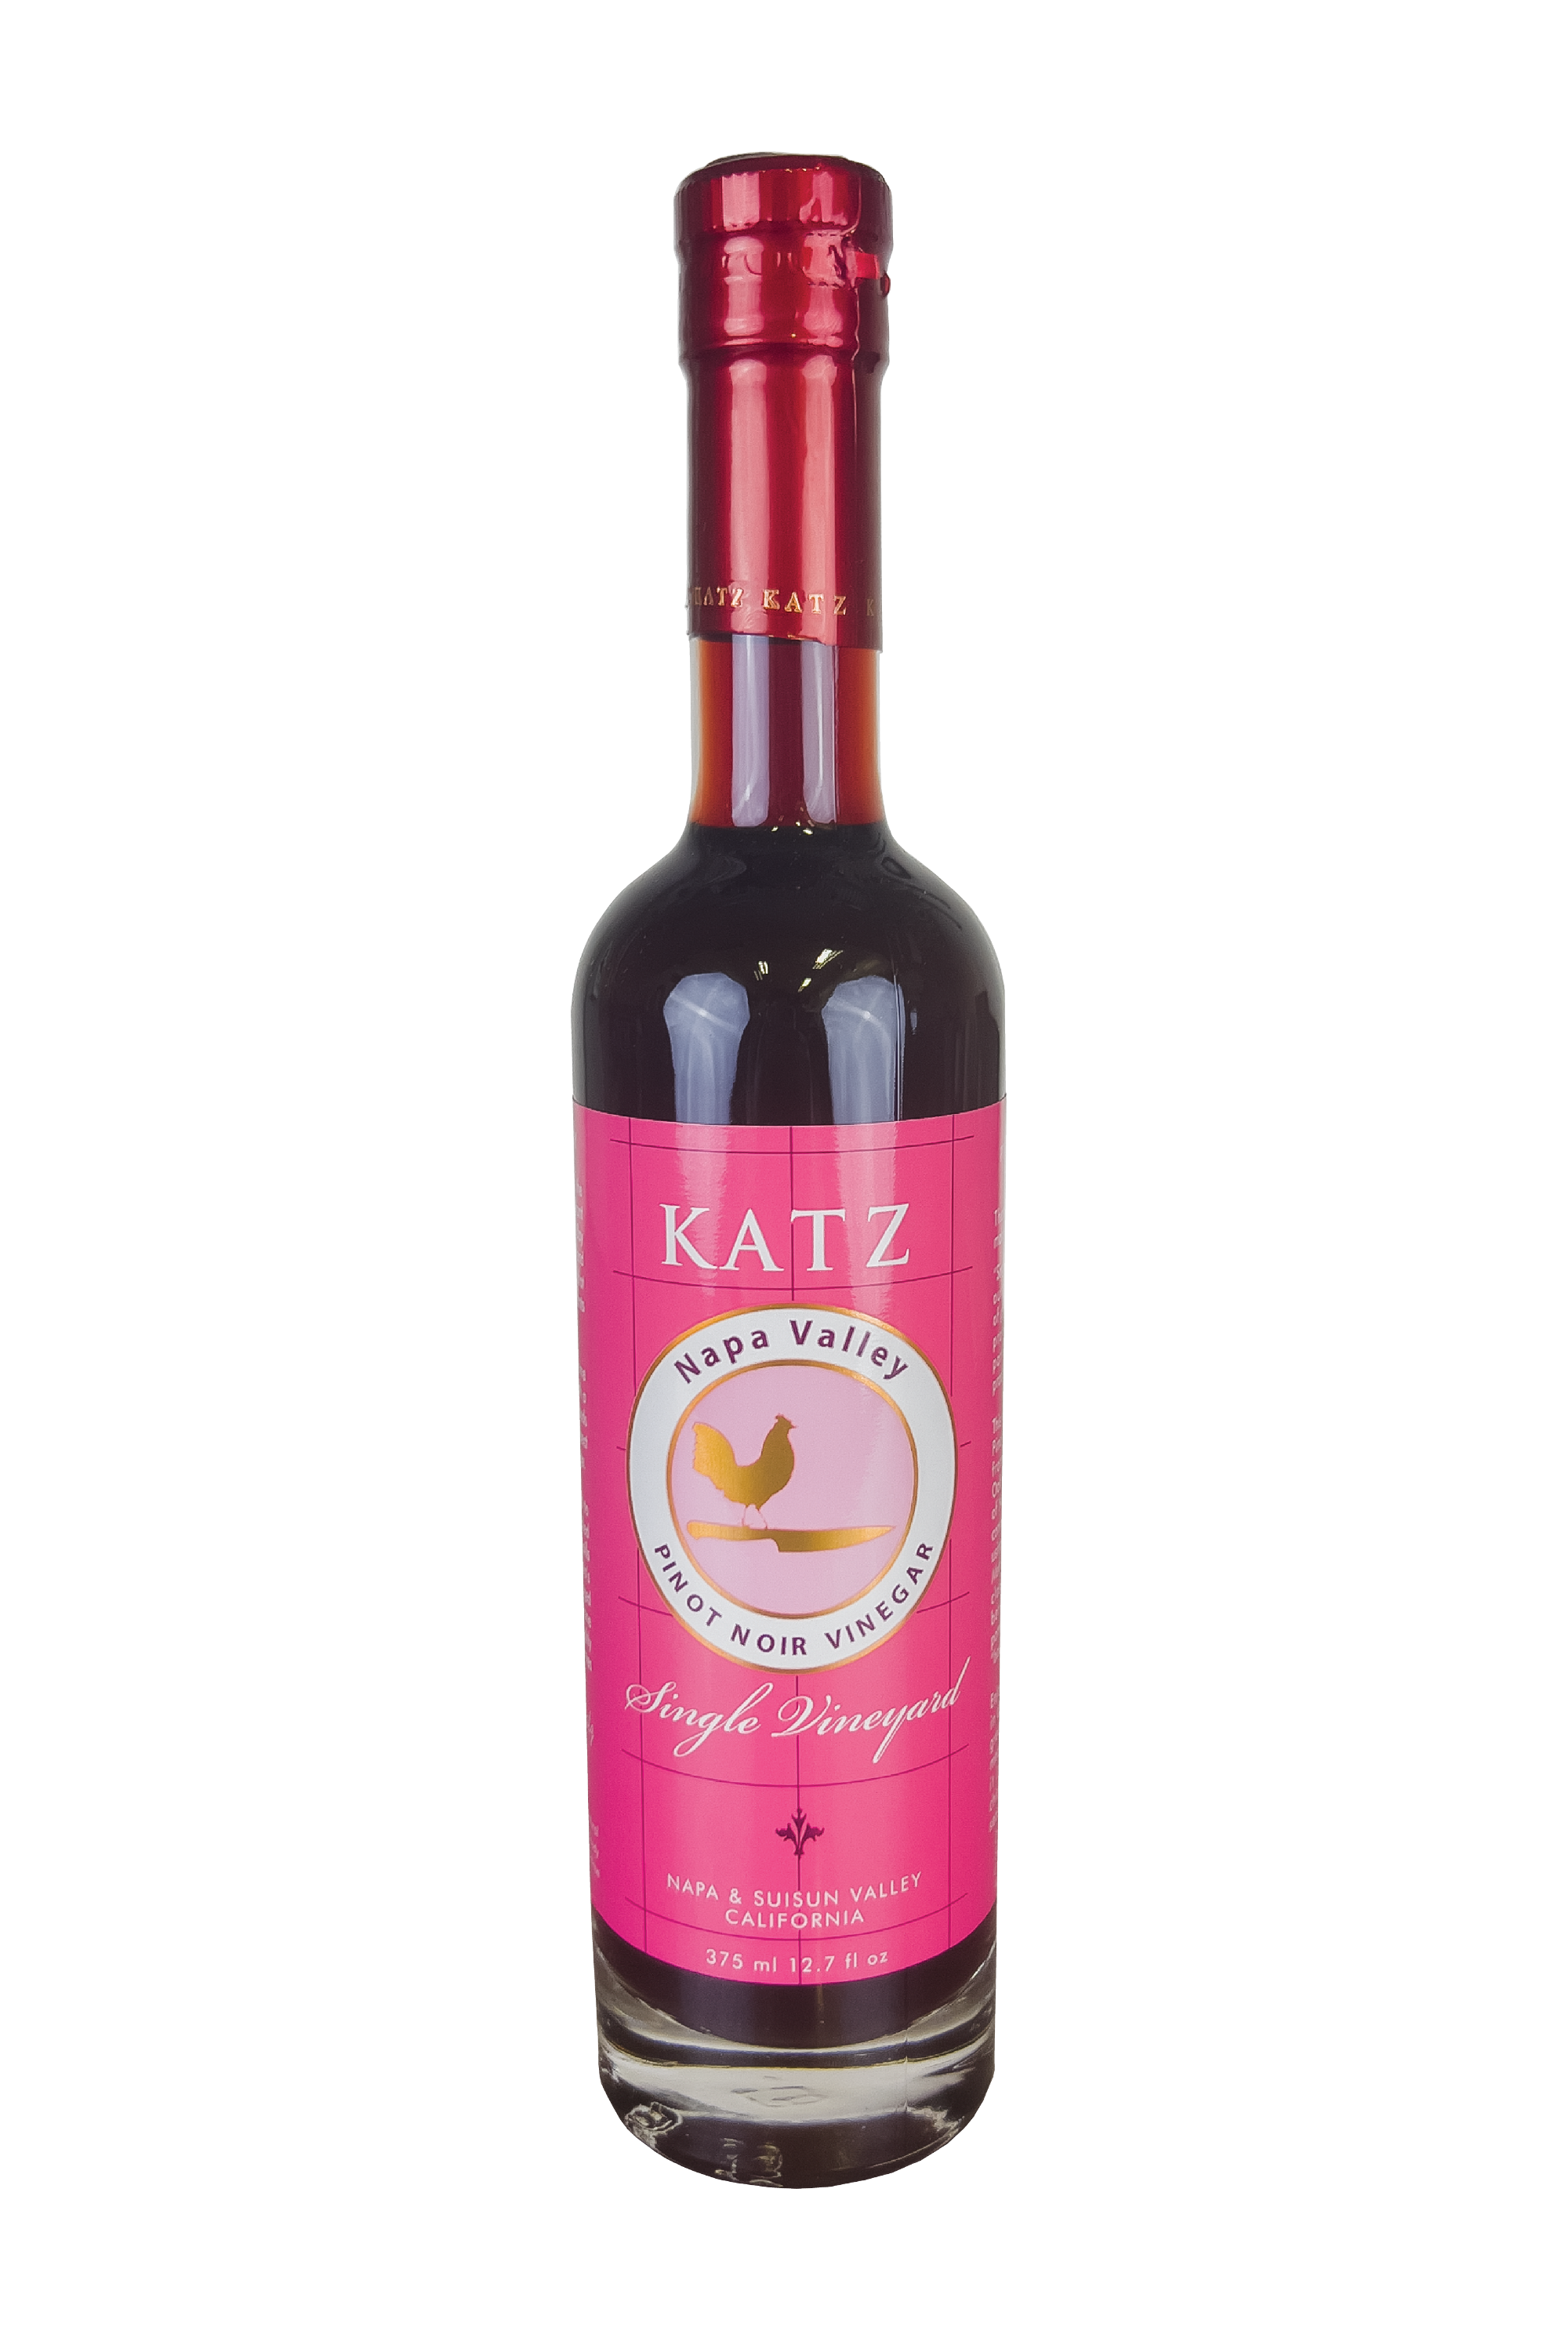 A 375 ml/12.7 oz glass bottle of Katz Pinot Noir Vinegar on a white background. Label is pink and white with a square lattice pattern. The bottle's logo depicts the shape of a rooster standing on the hilt of a chef's knife in gold with a white, circular border around the picture that says, "Napa Valley Pinot Noir Vinegar." Below the logo is small floral motif between the words "Single Vineyard" and "Napa & Suisun Valley California." Vinegar is a rich, dark red color.